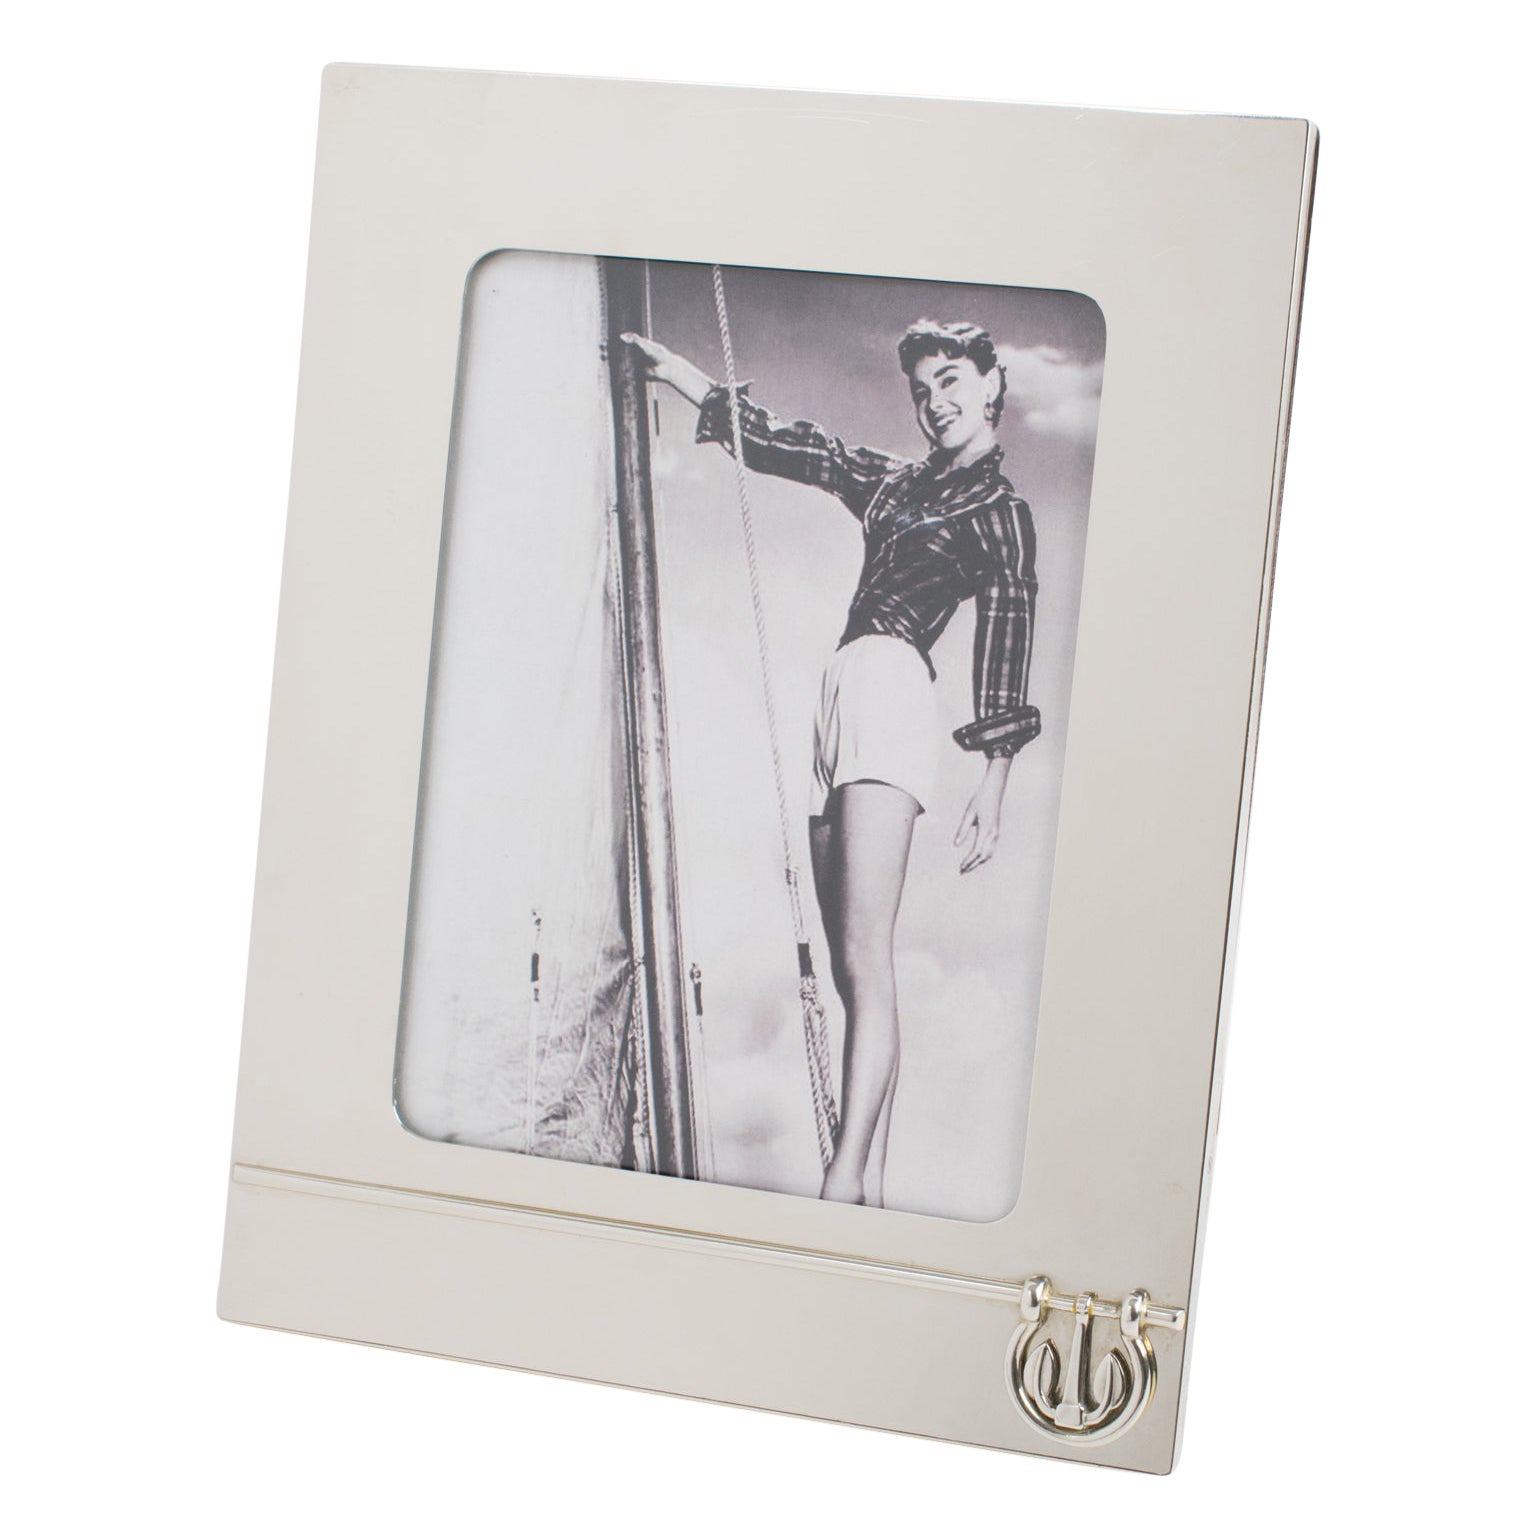 Gucci Italy Chrome Picture Frame with Nautical Design